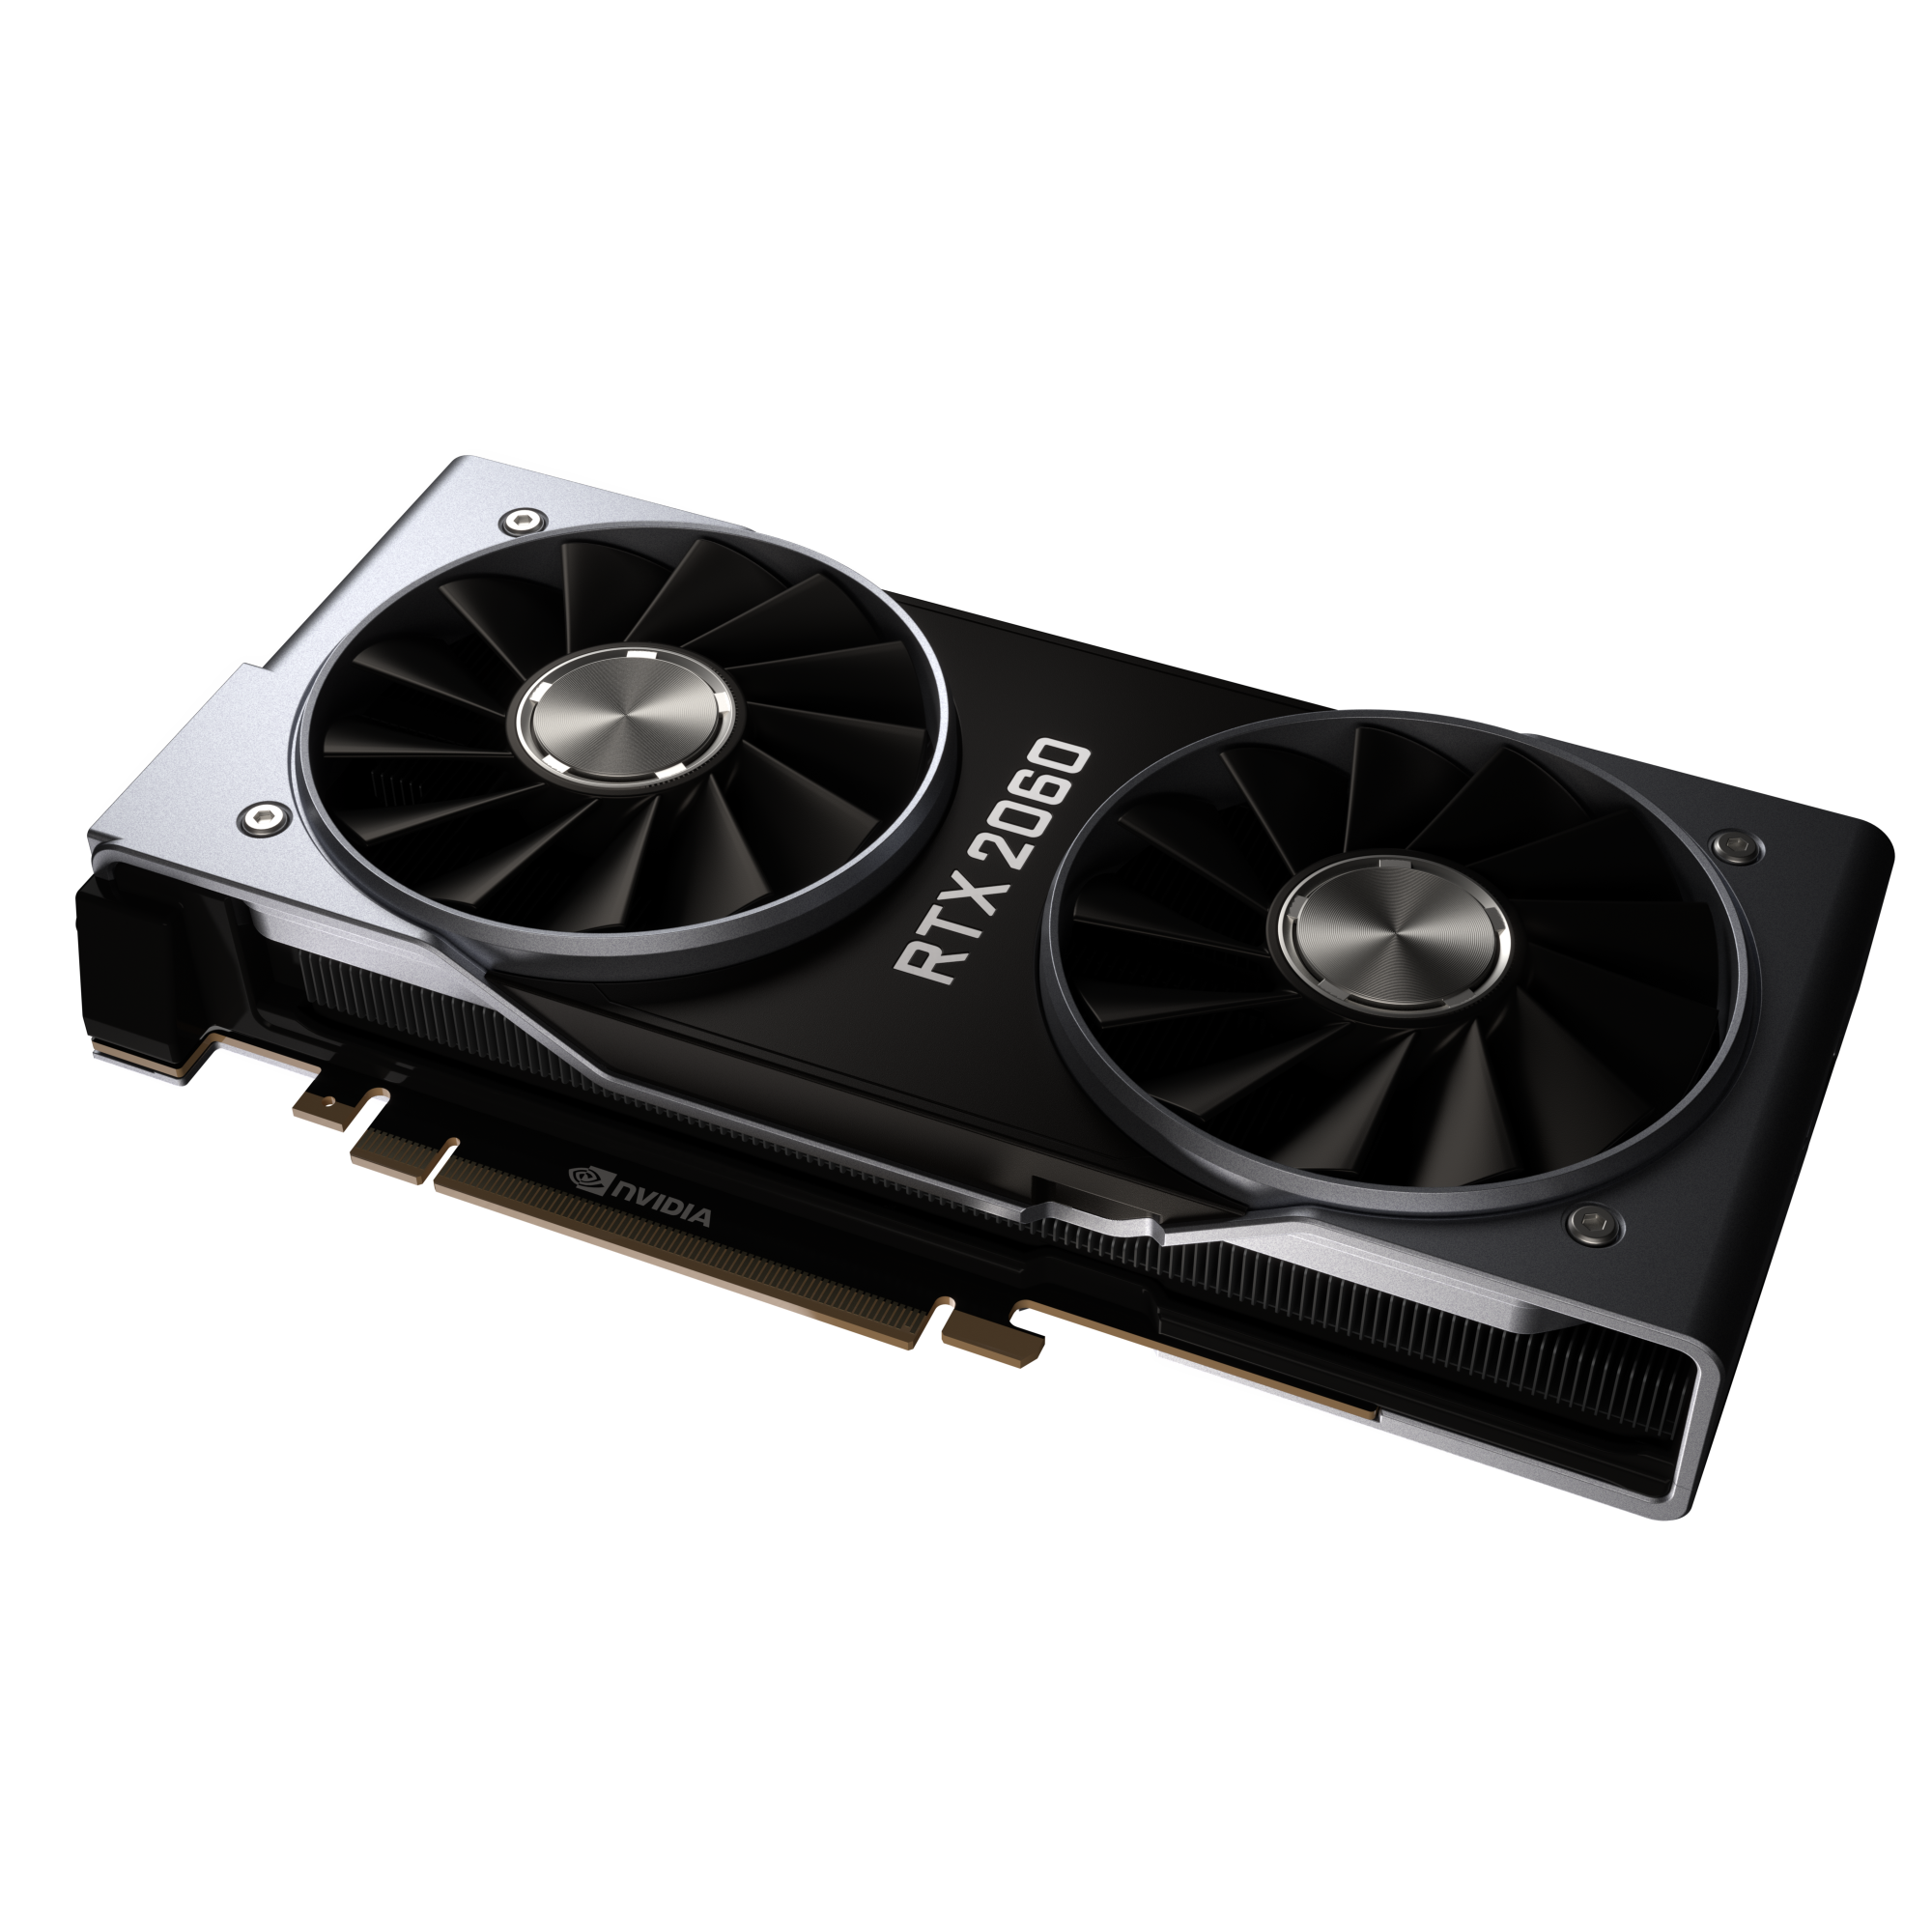 Introducing The GeForce RTX 2060 